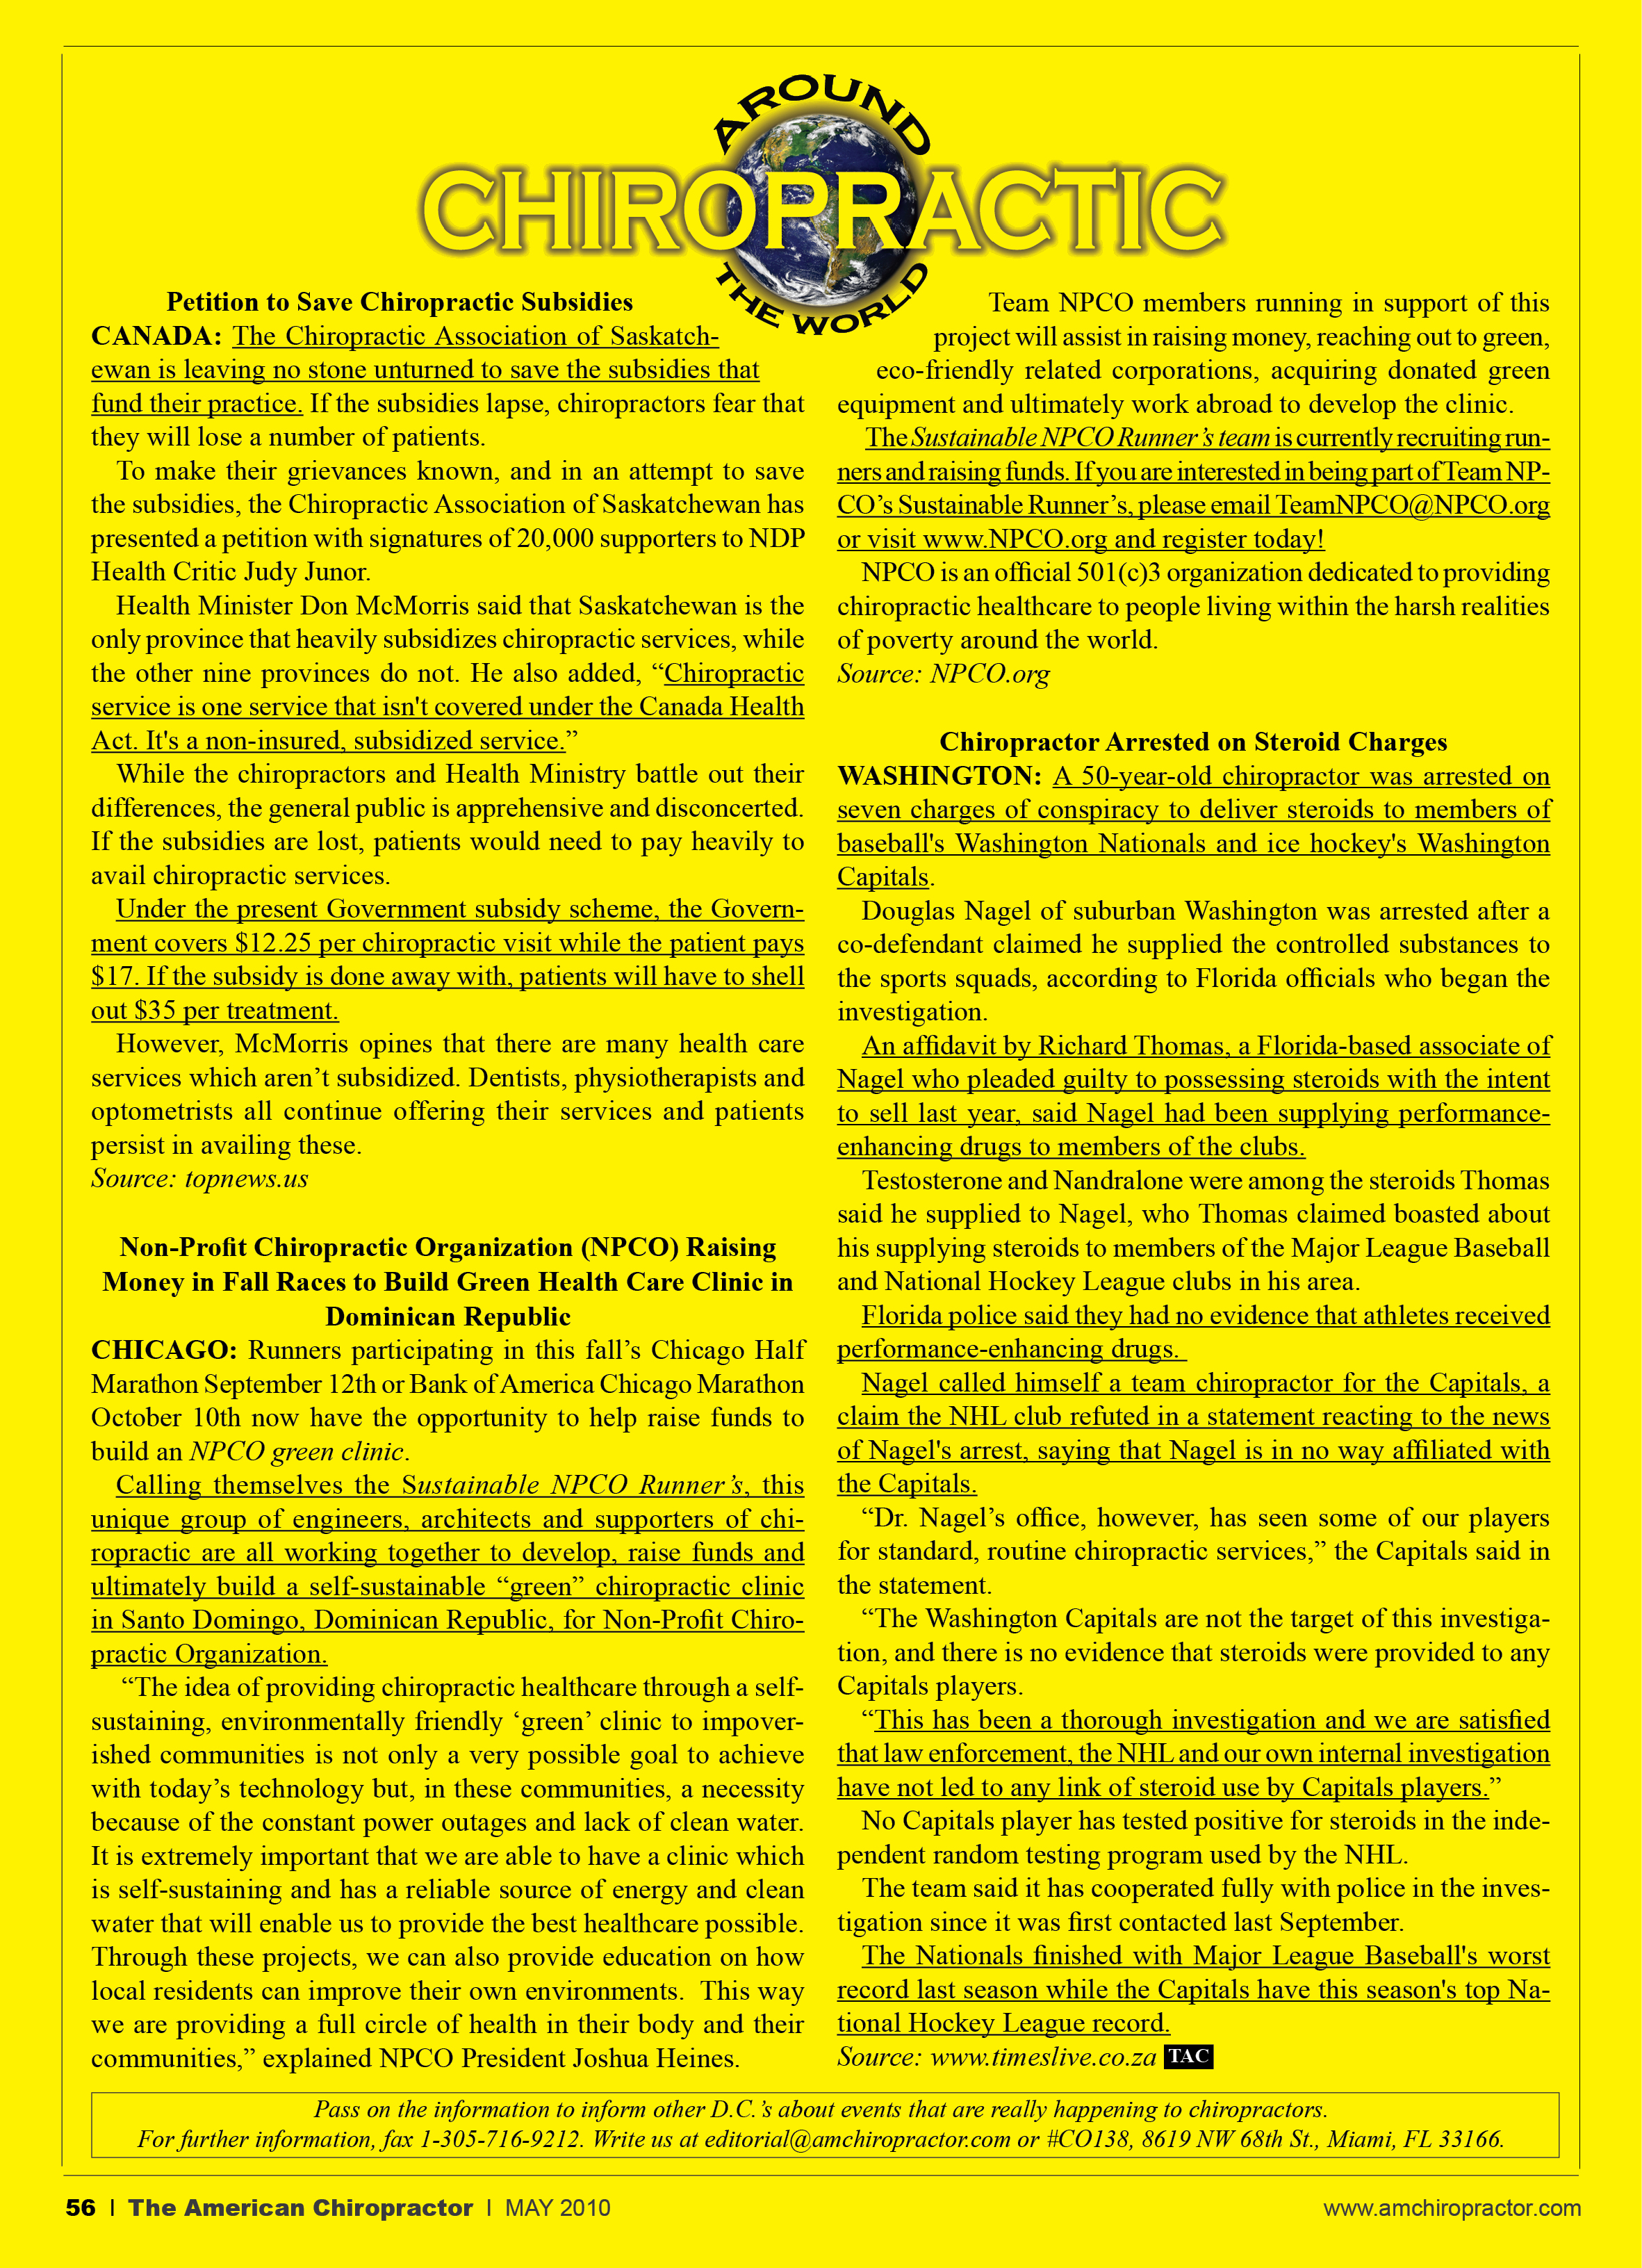 http://www.theamericanchiropractor.com/images/yellow%20page.jpg